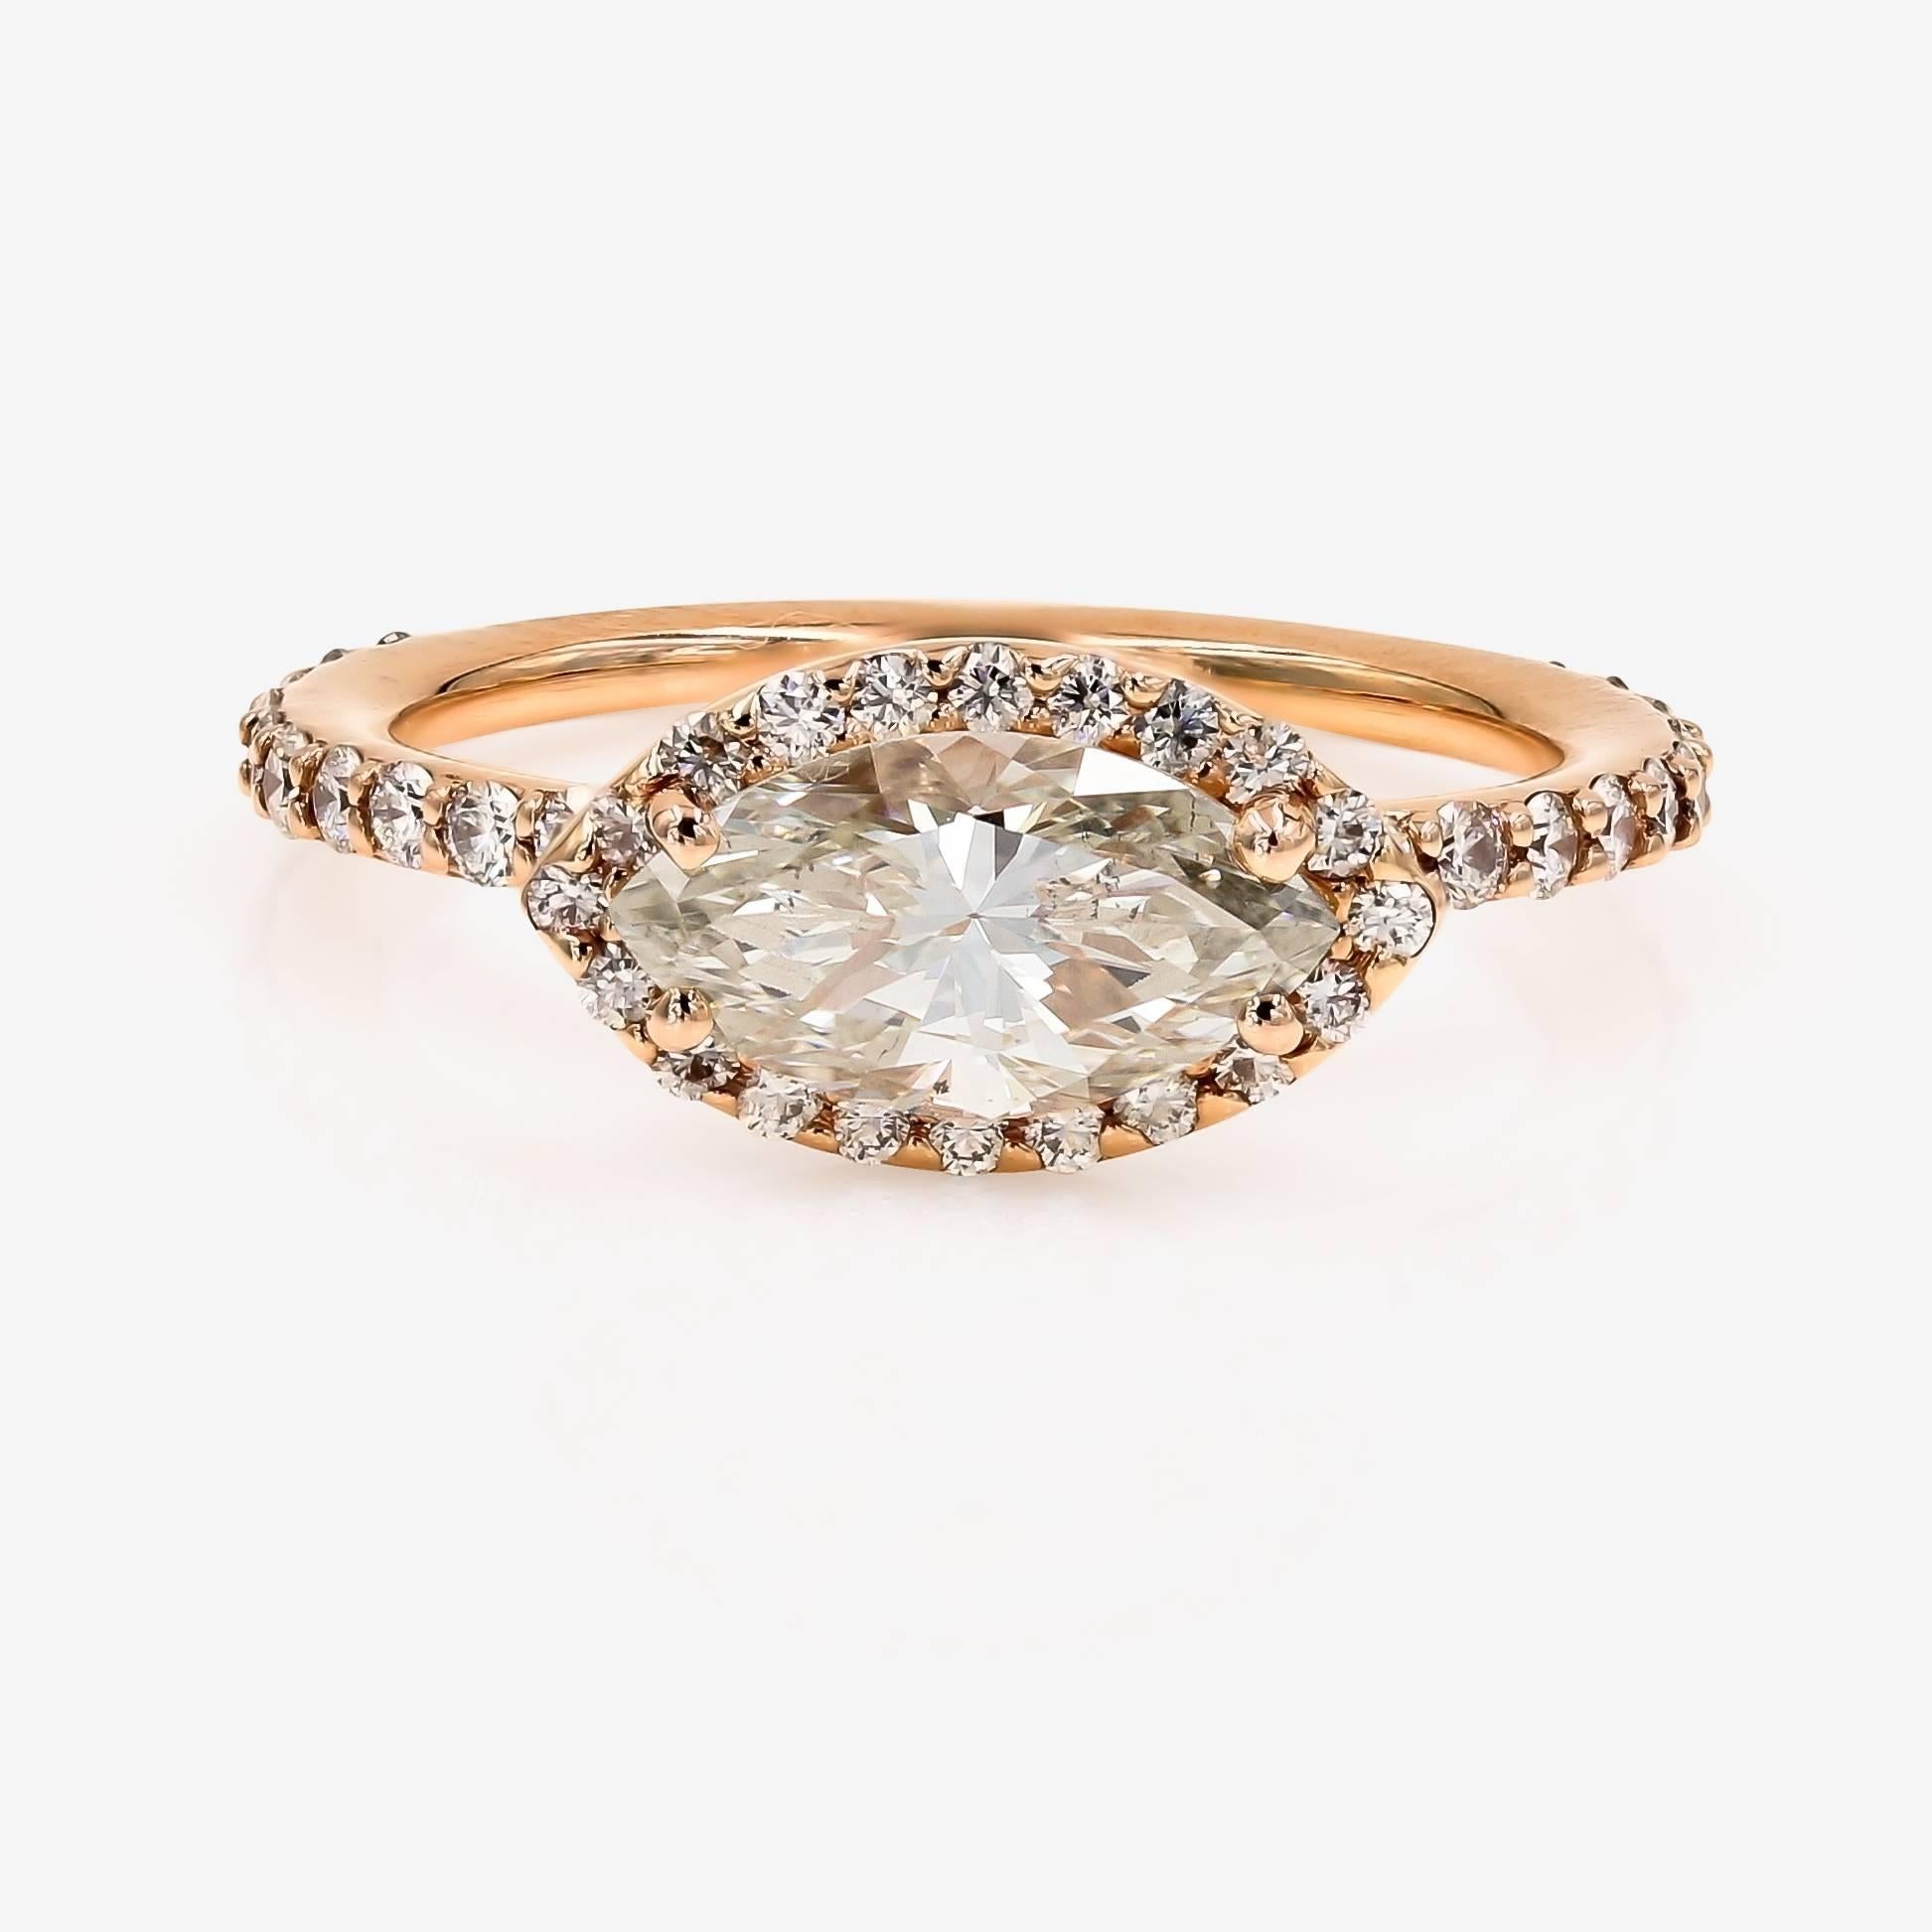 This Lester Lampert D-Bead style setting in 18kt. rose gold, contains a 1.51cts. Marquise center that is K color and SI2 clarity. Surrounding the center and down the shank are 44 ideal cut round diamonds=.59ct. t.w.

This pieces comes with GIA